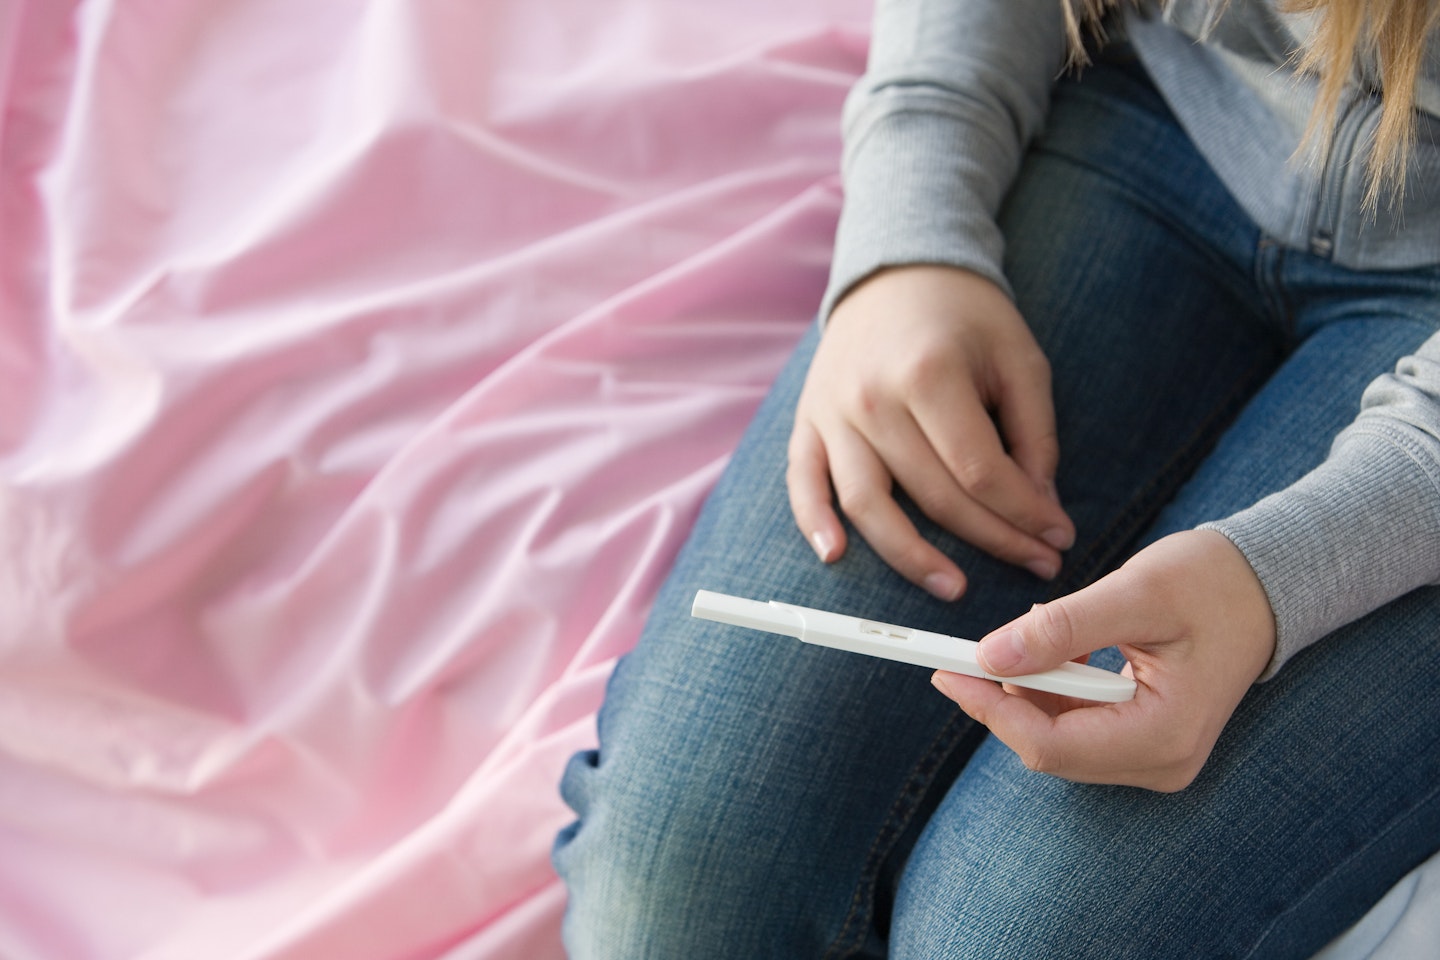 Stock image of a young girl looking at a pregnancy test